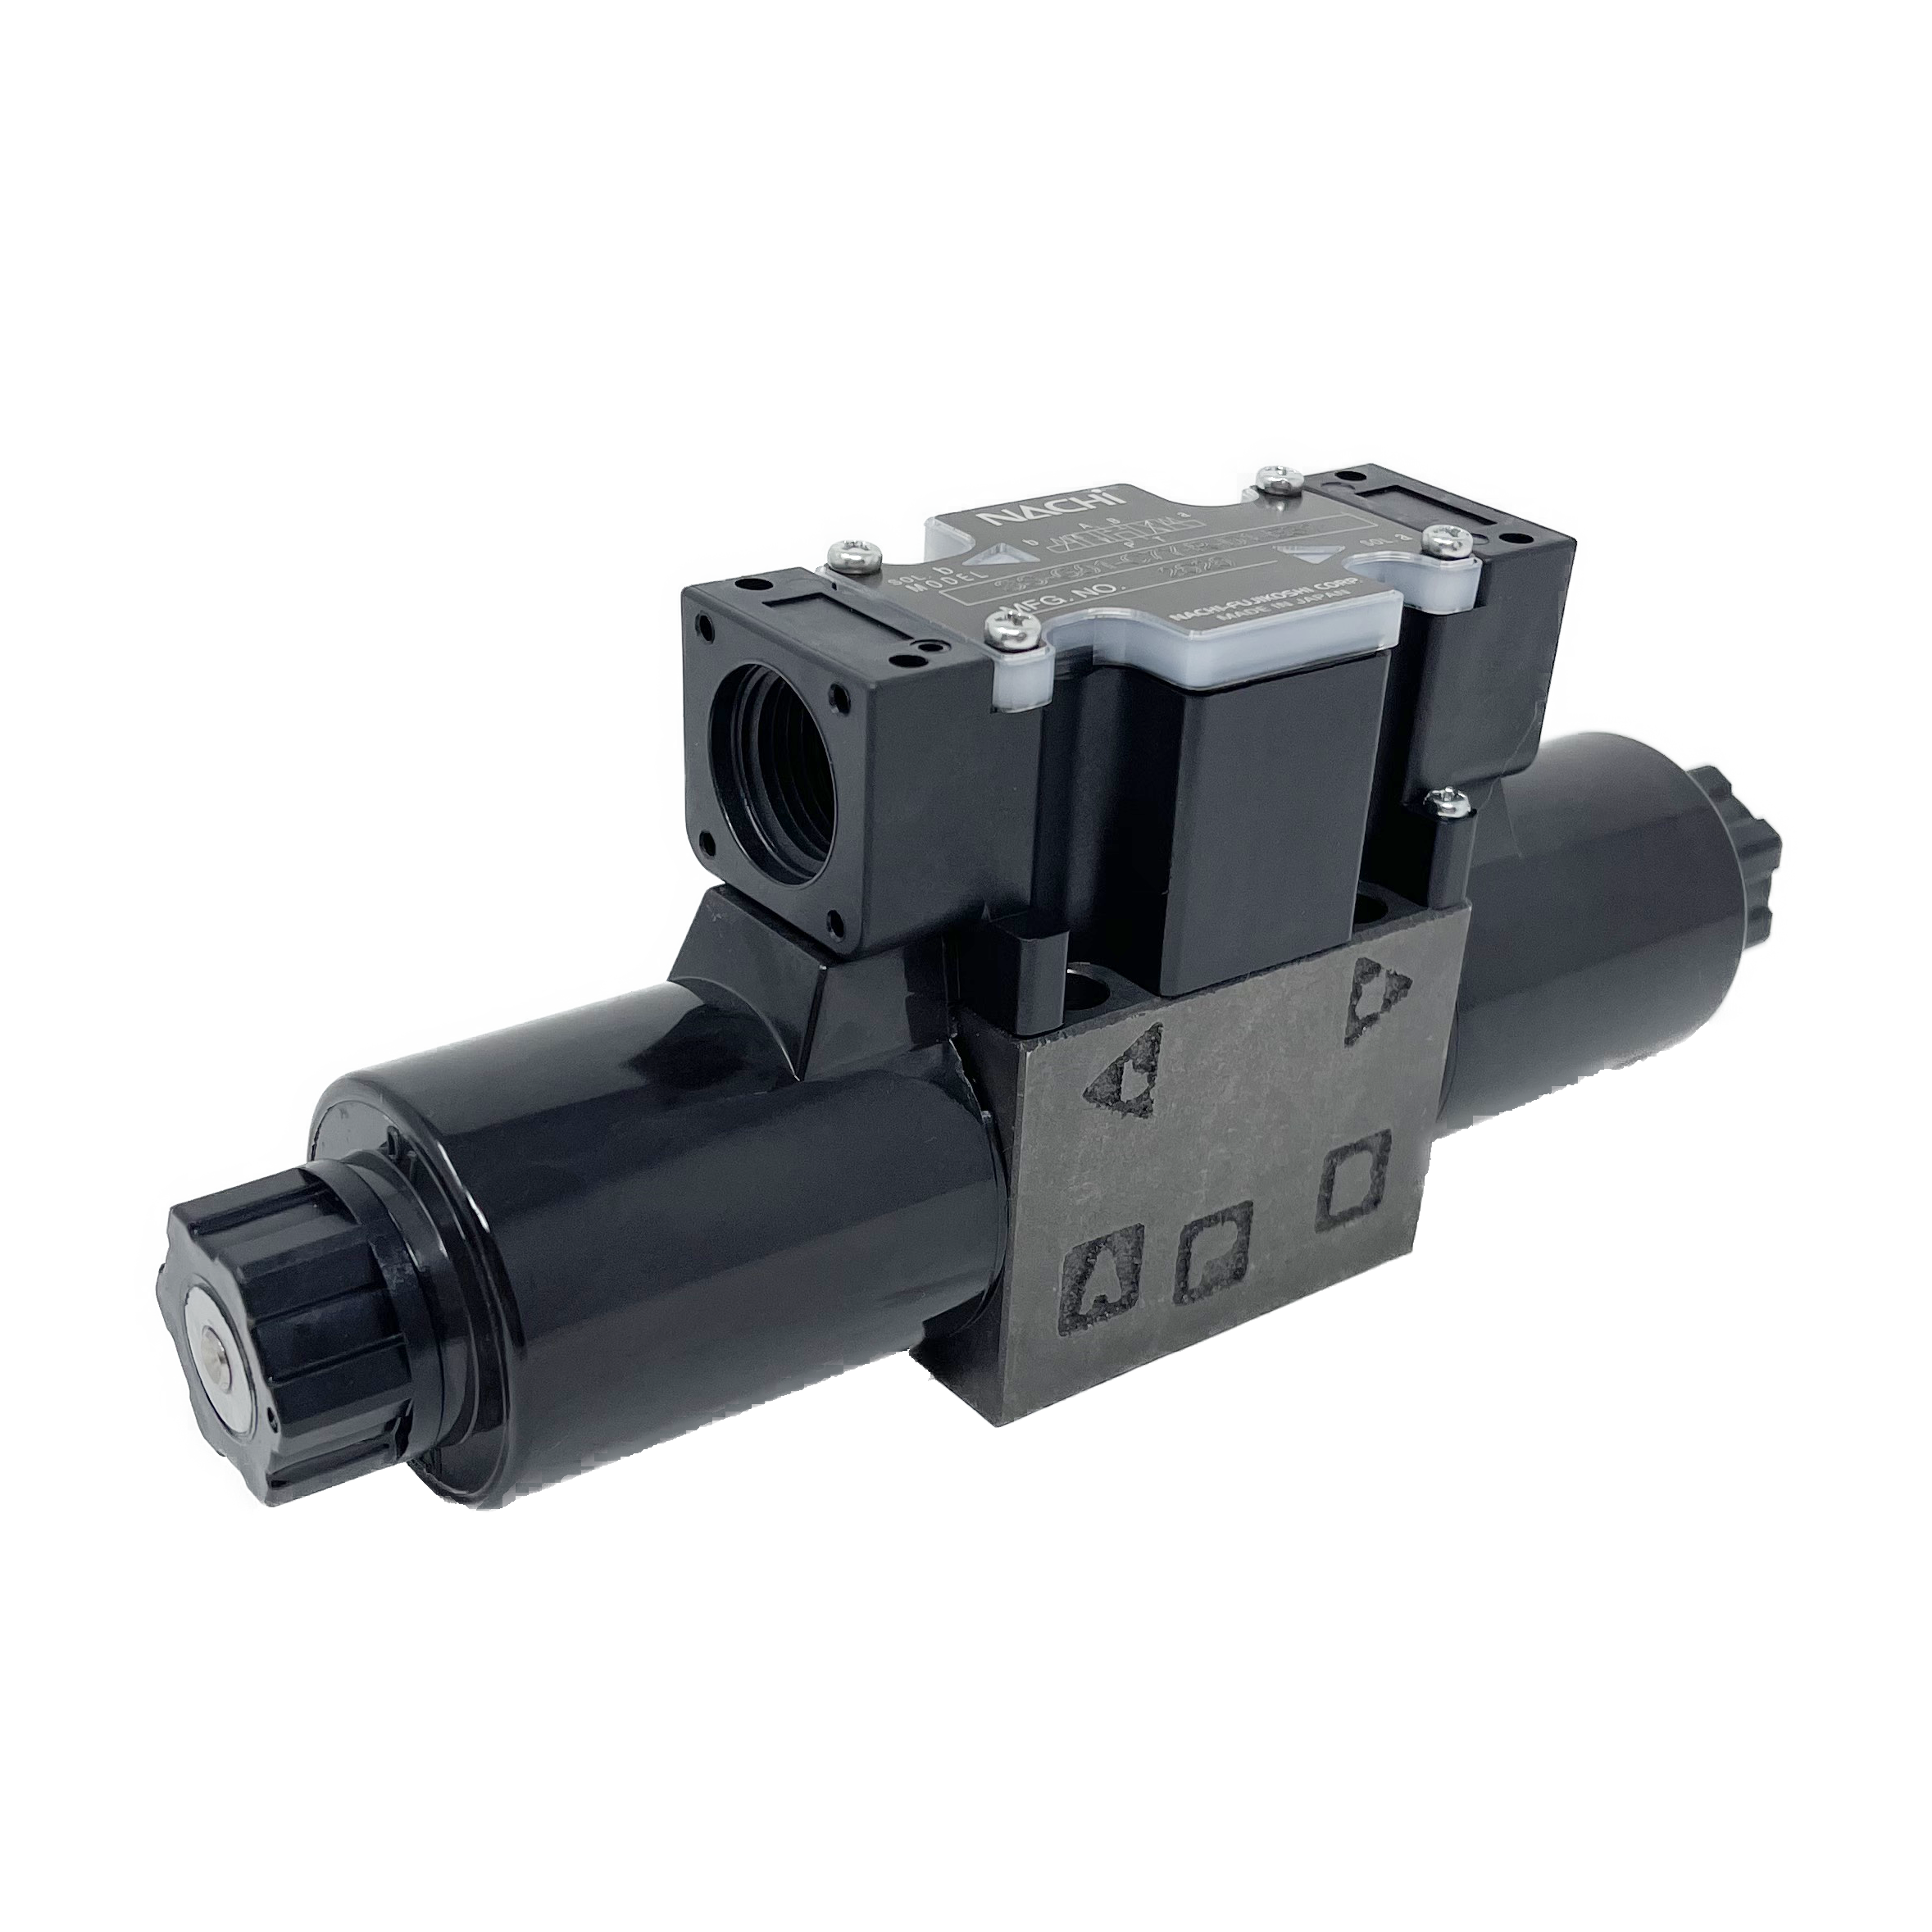 SS-G01-C7Y-FR-D1-E31 : Nachi Solenoid Valve, 3P4W, D03 (NG6), 13.2GPM, 5075psi, P to T with A & B Blocked in Neutral, 12 VDC, Wiring Box with Lights, Shockless Type